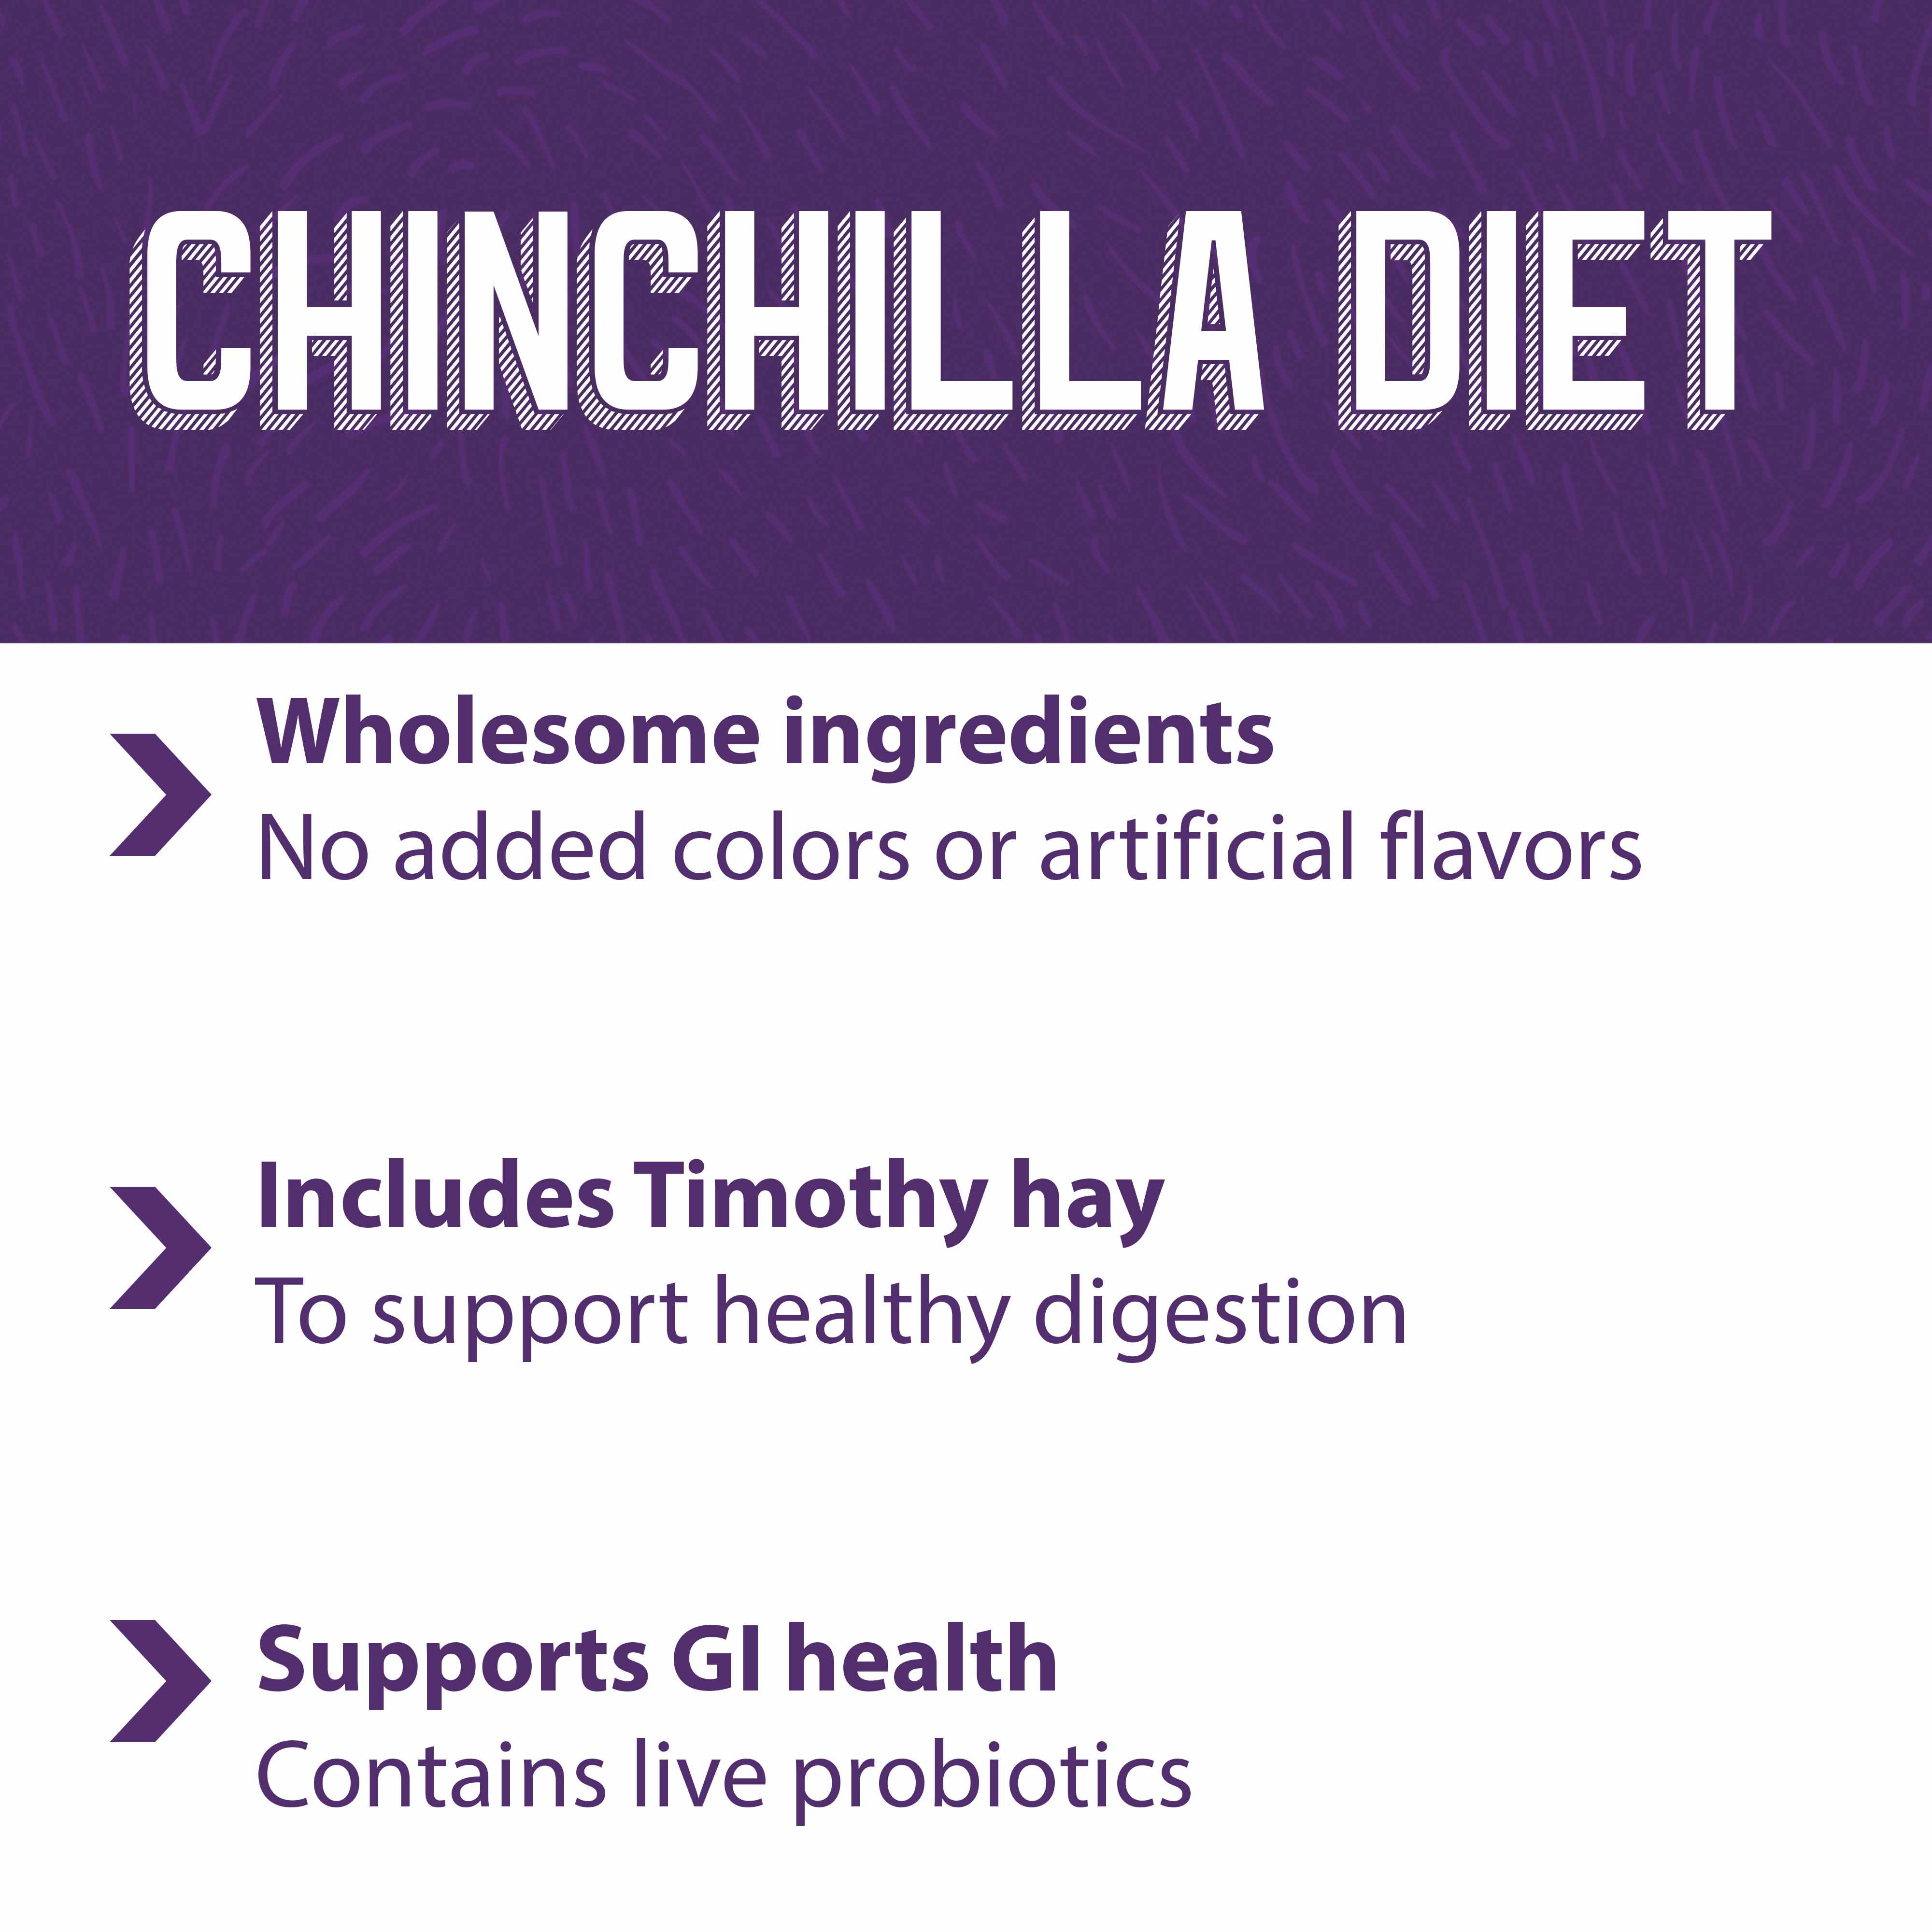 Mazuri Chinchilla diet is made with wholesome ingredients